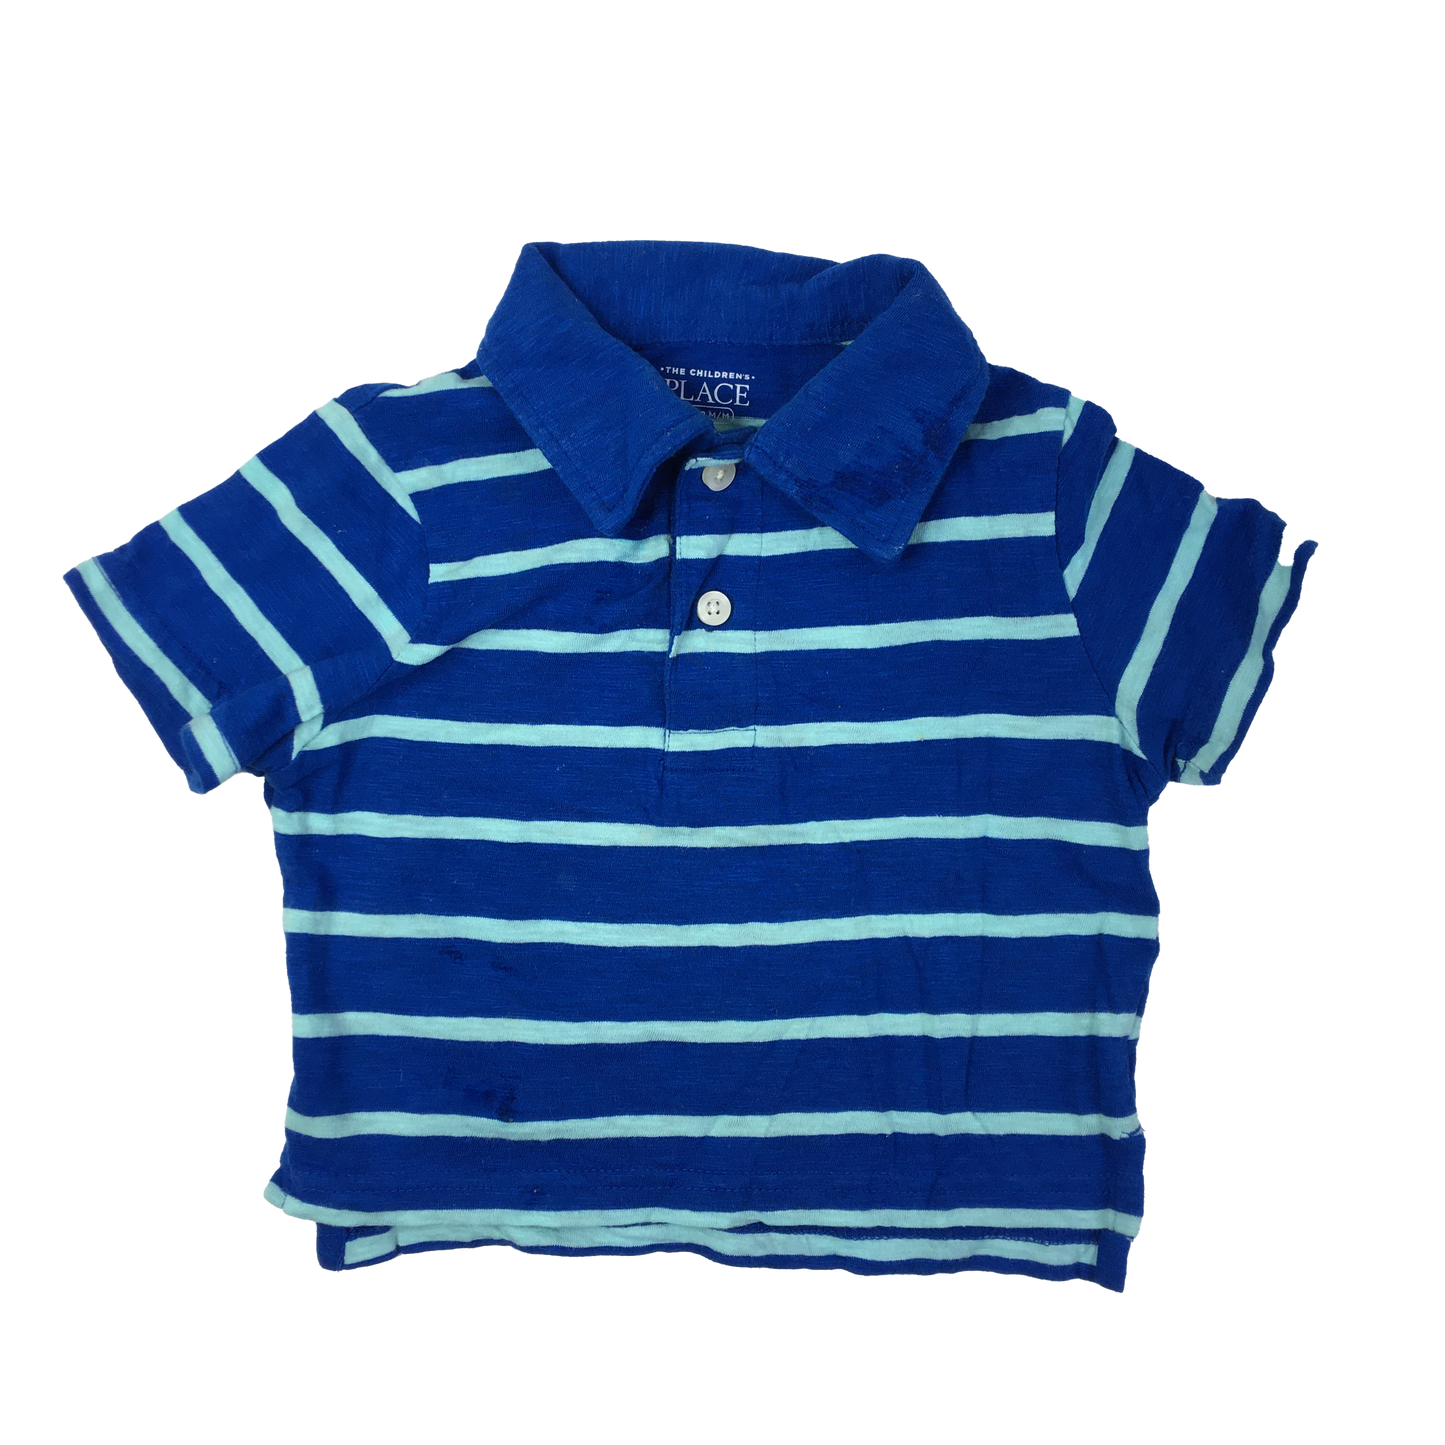 The Children's Place Blue & Turquoise Strip Polo 12-18M